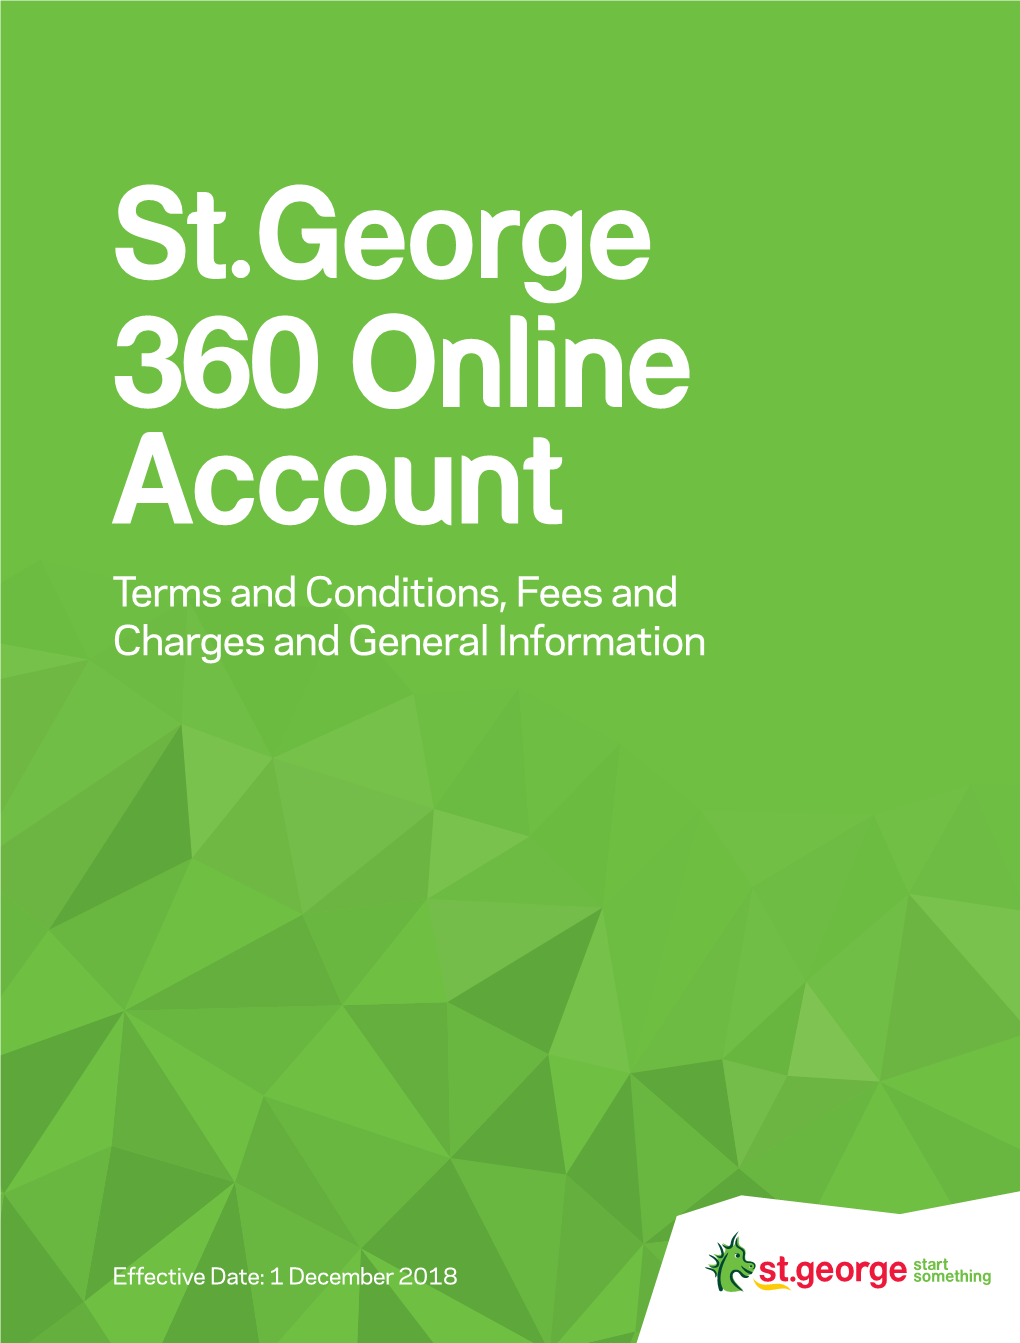 St.George 360 Online Account Terms and Conditions, Fees and Charges and General Information